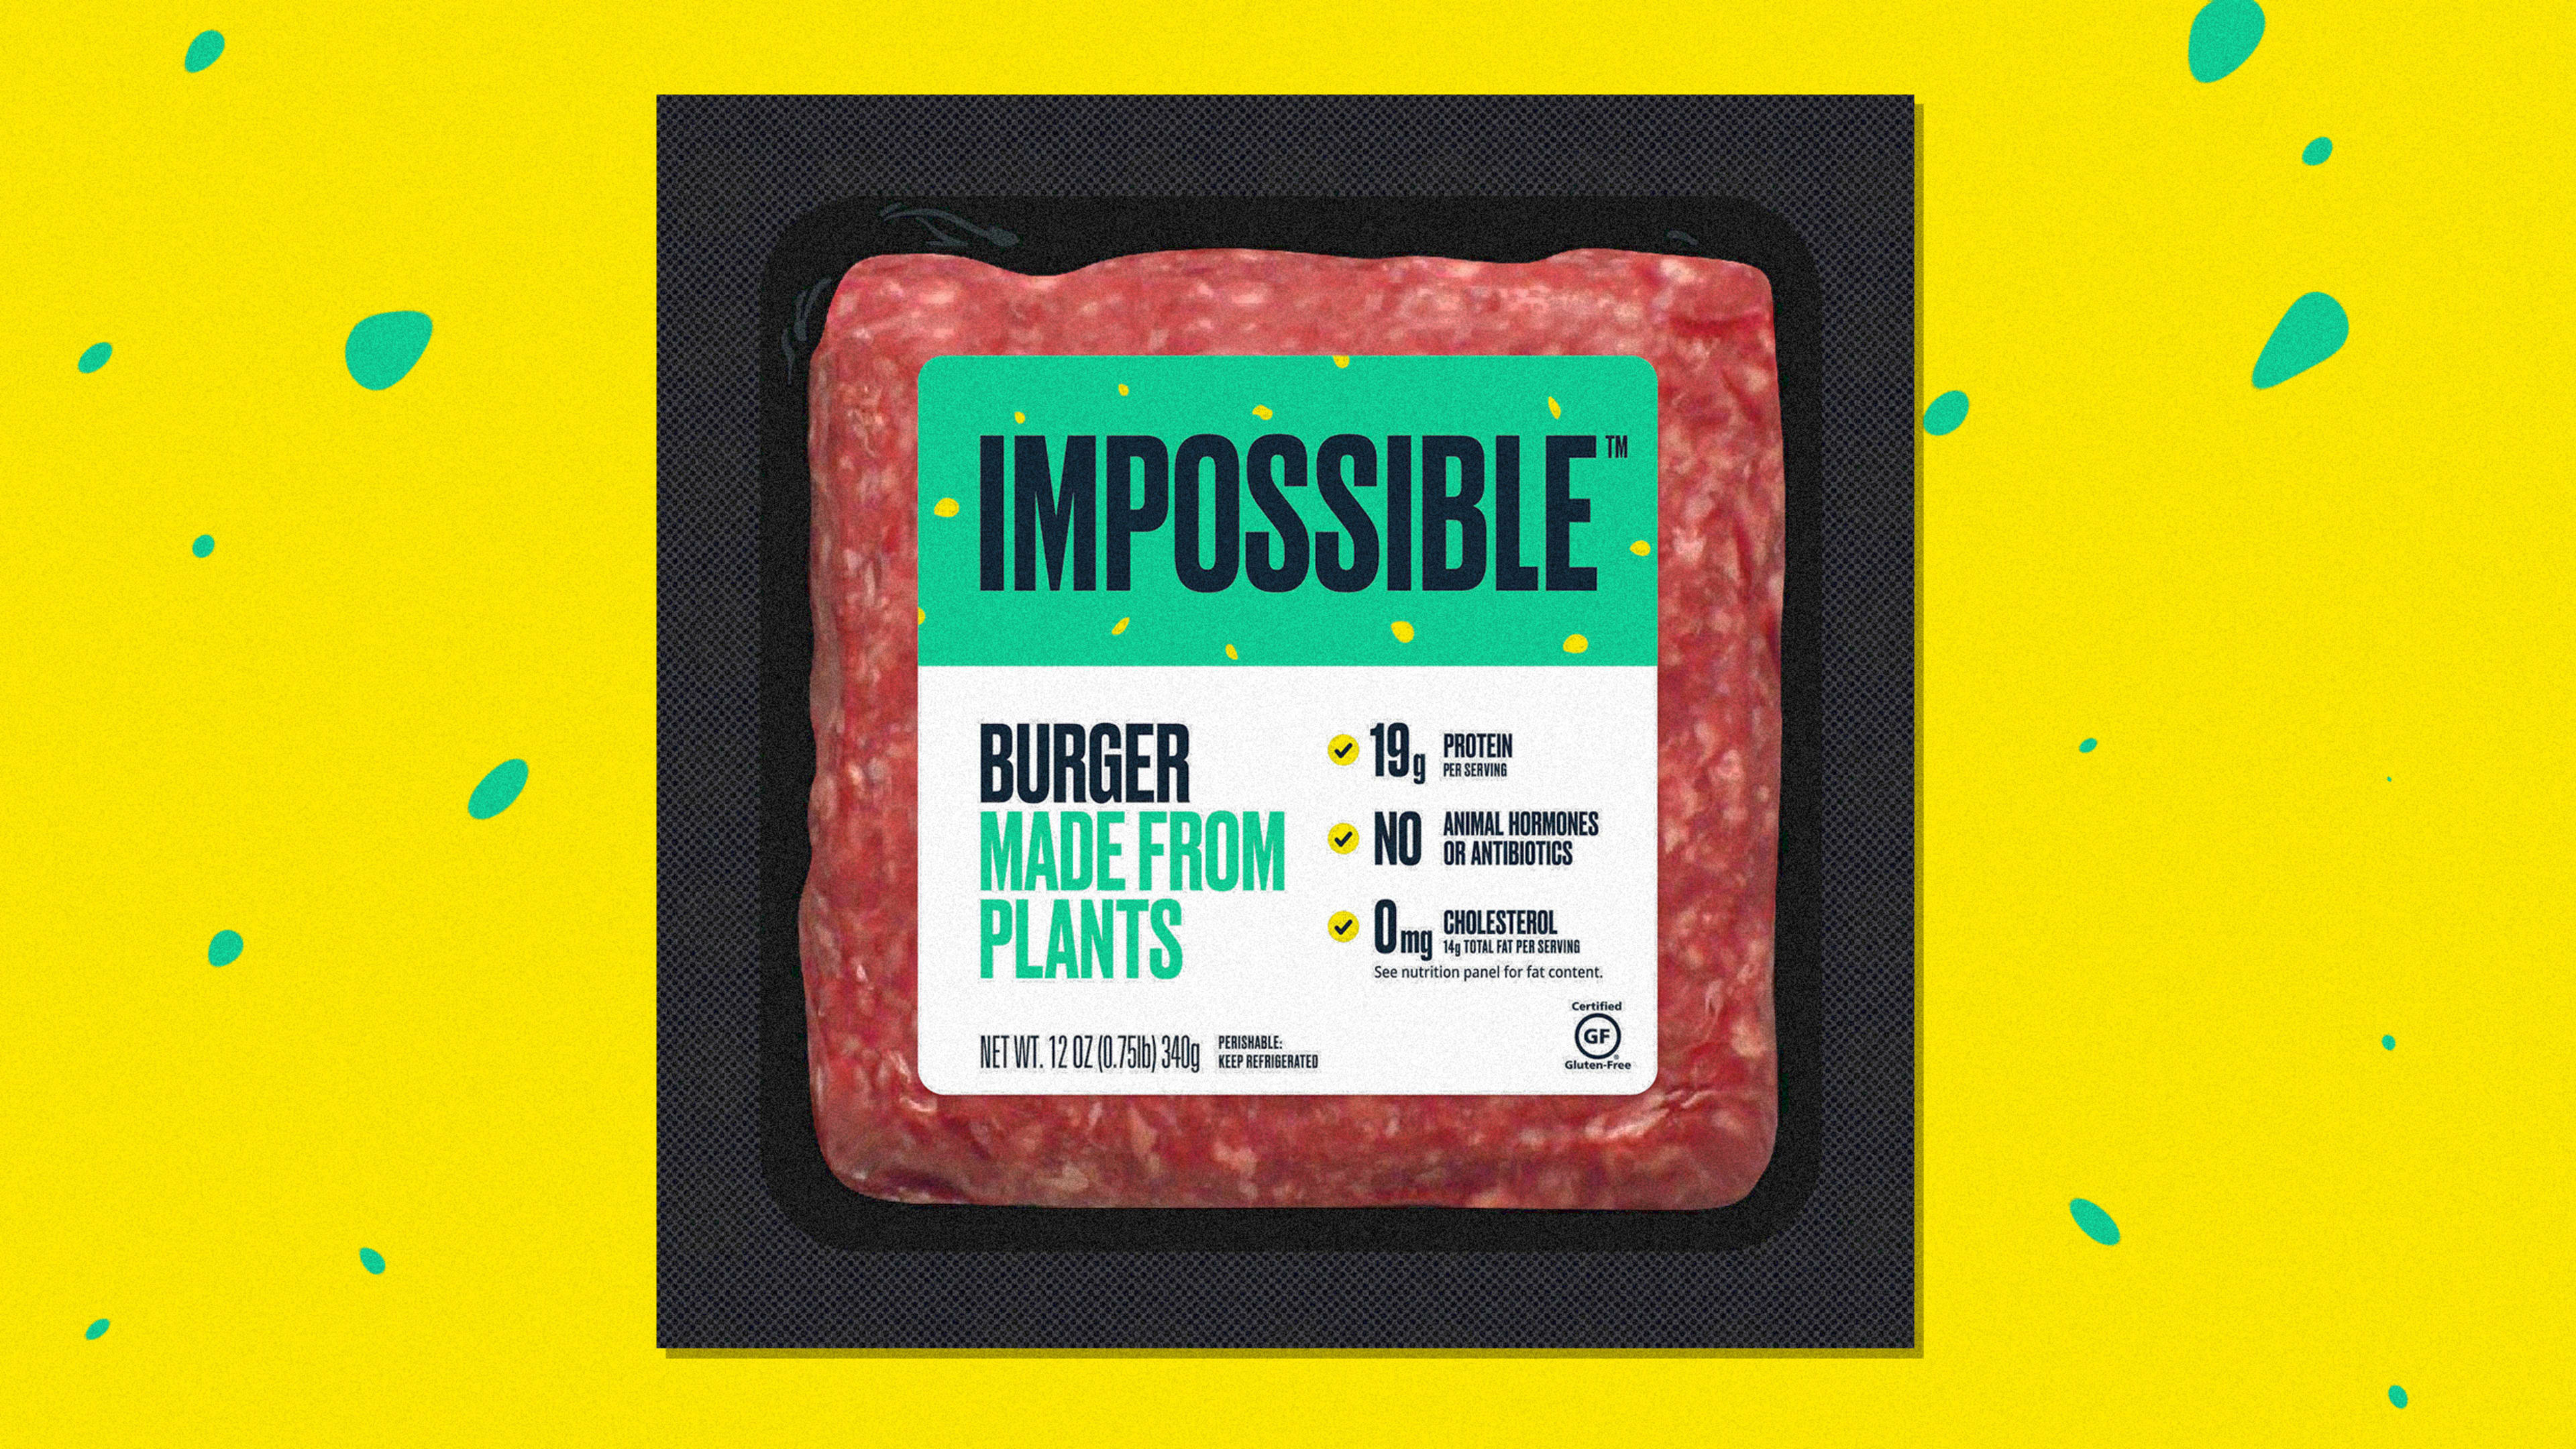 You can now buy The Impossible Burger in grocery stores (if you’re in SoCal, at one specific grocery chain)